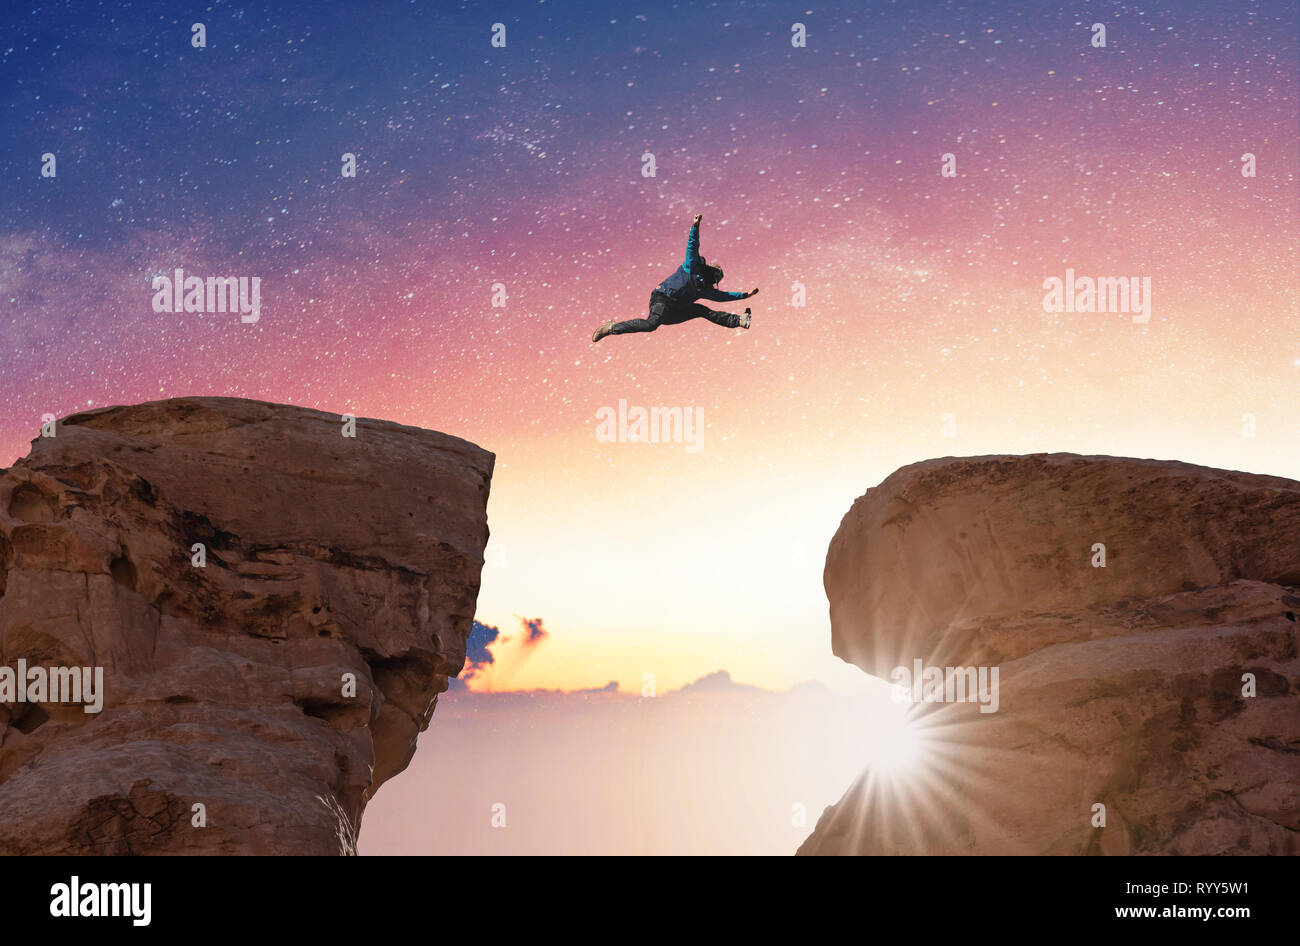 Challenge, risk, freedom and imagination concept. Silhouette a man jumping over precipice crossing cliff Stock Photo